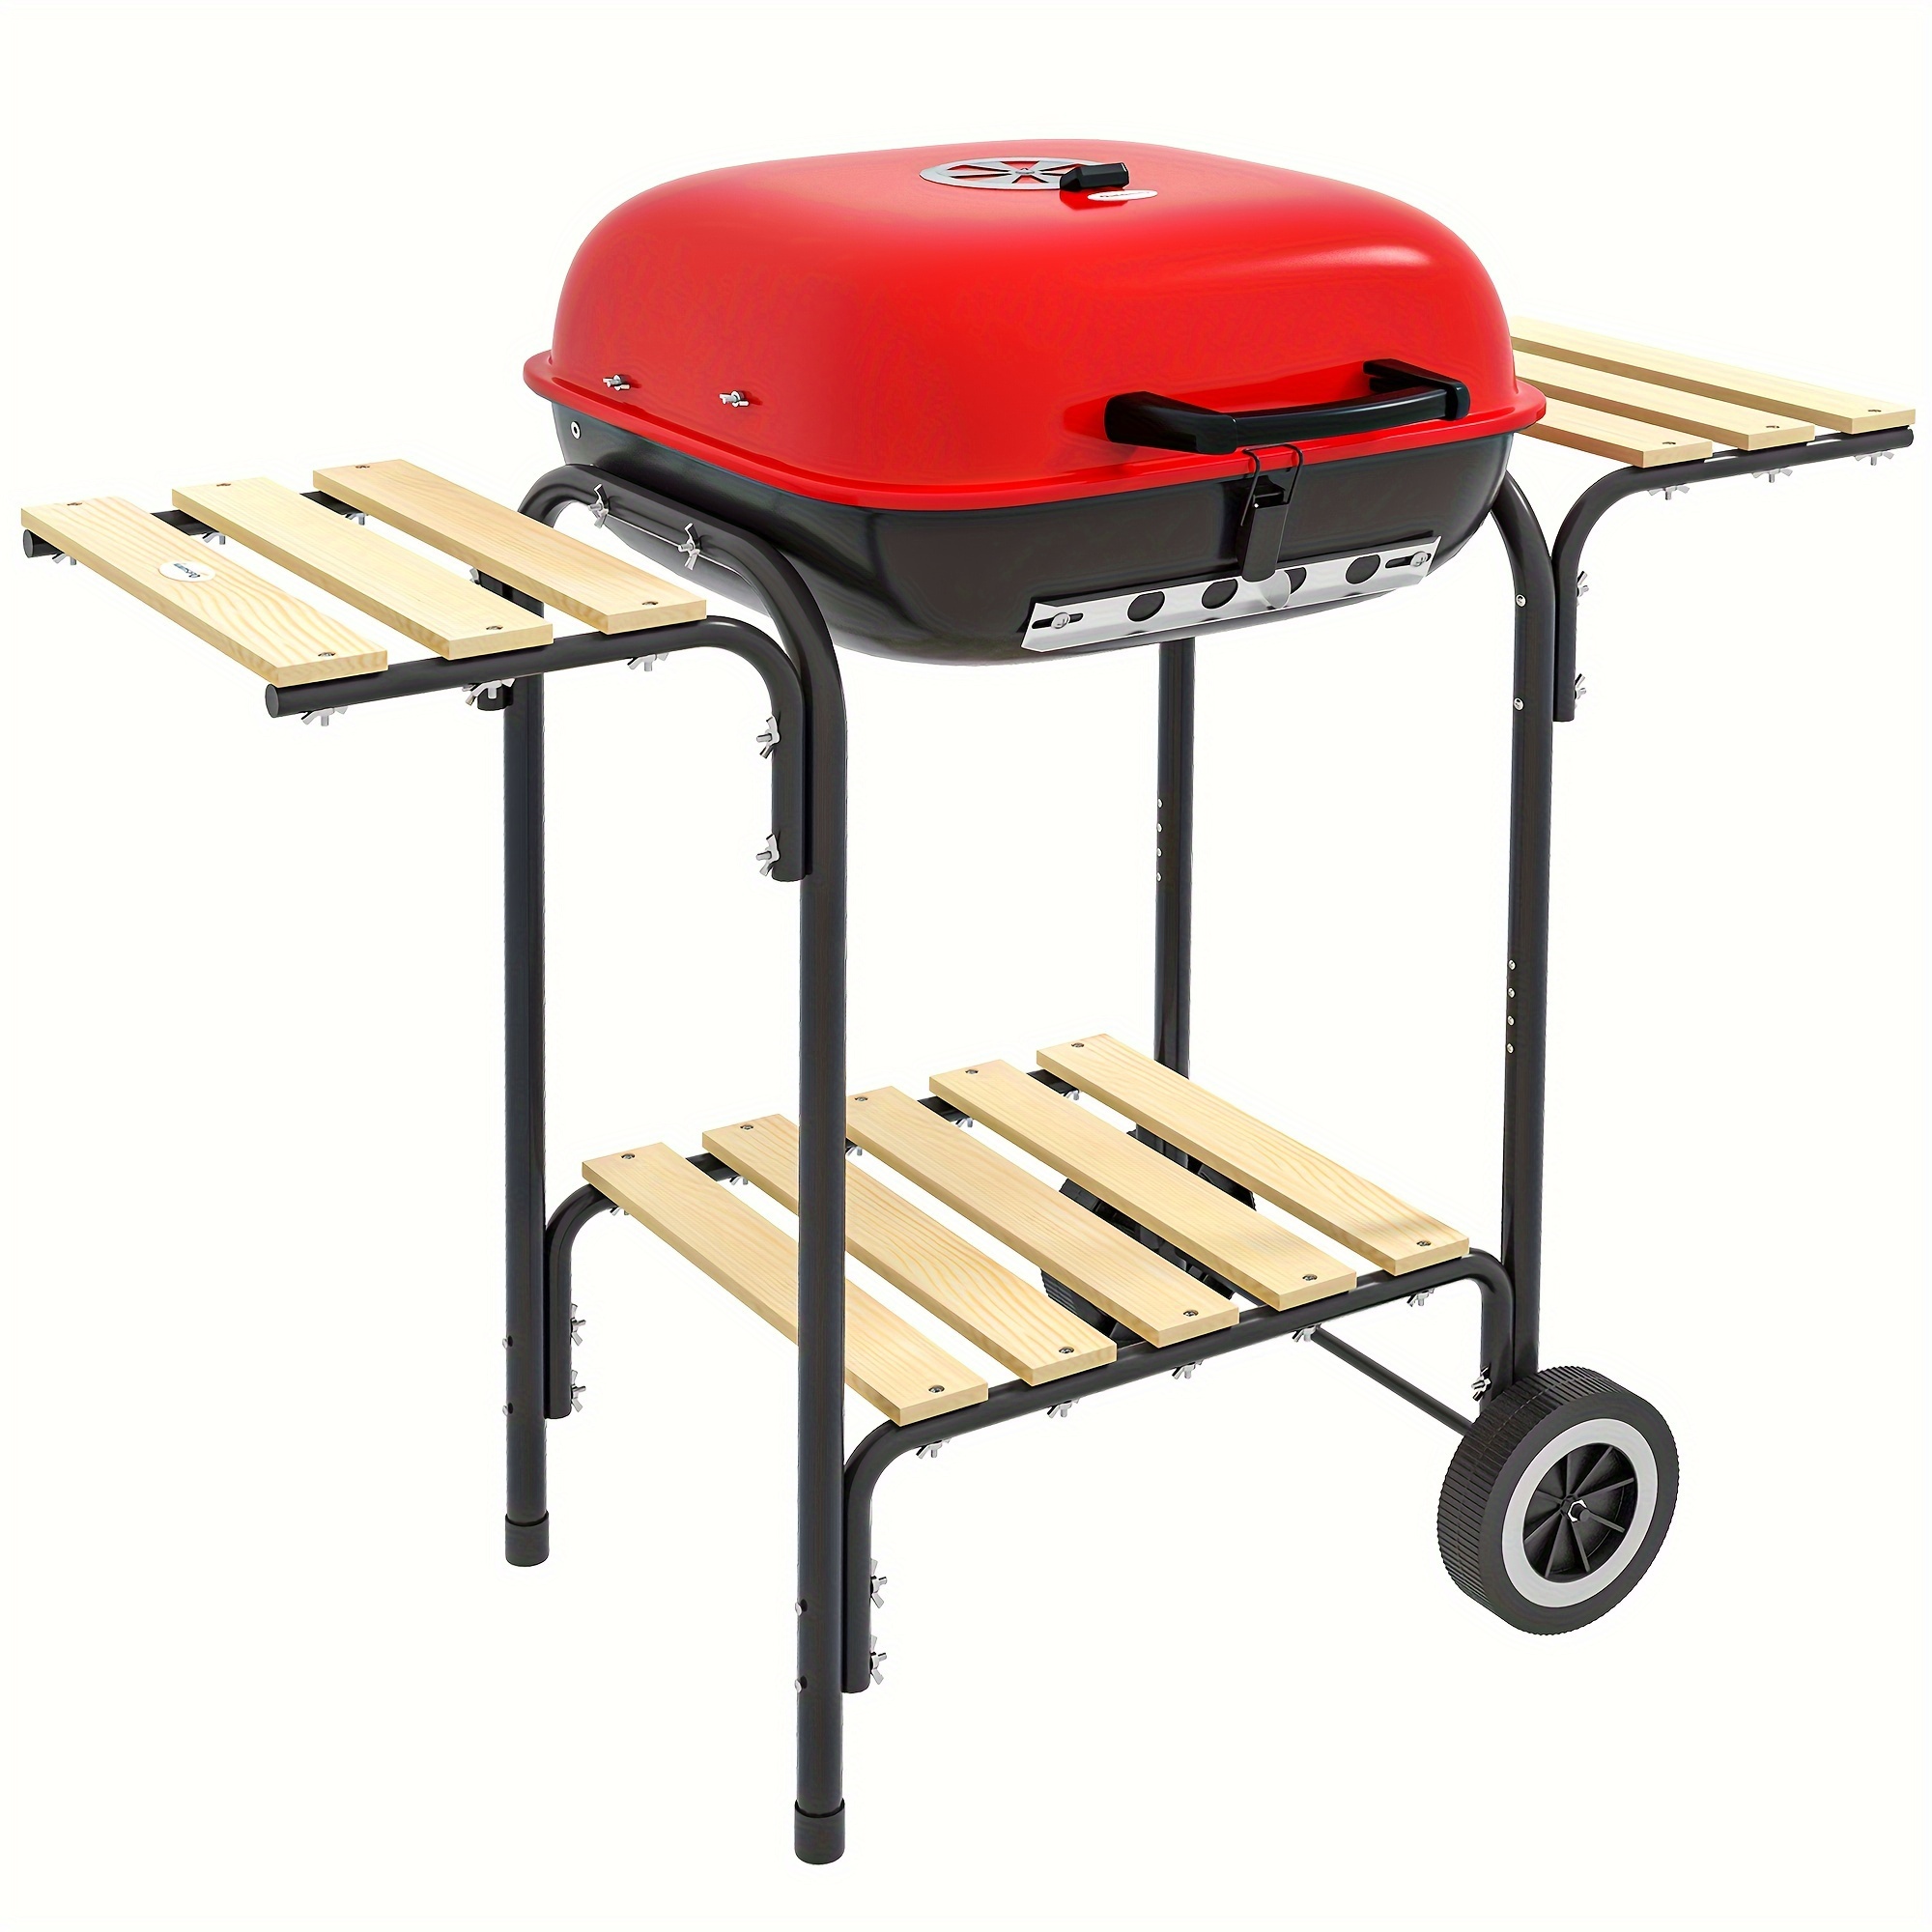 

17-inch Portable Charcoal Grill With Wheels, 2 Side Tables And Bottom Shelves, Grill With Adjustable Vent With Lid, Perfect For Picnicking, Camping, Backyard, Cooking, Red